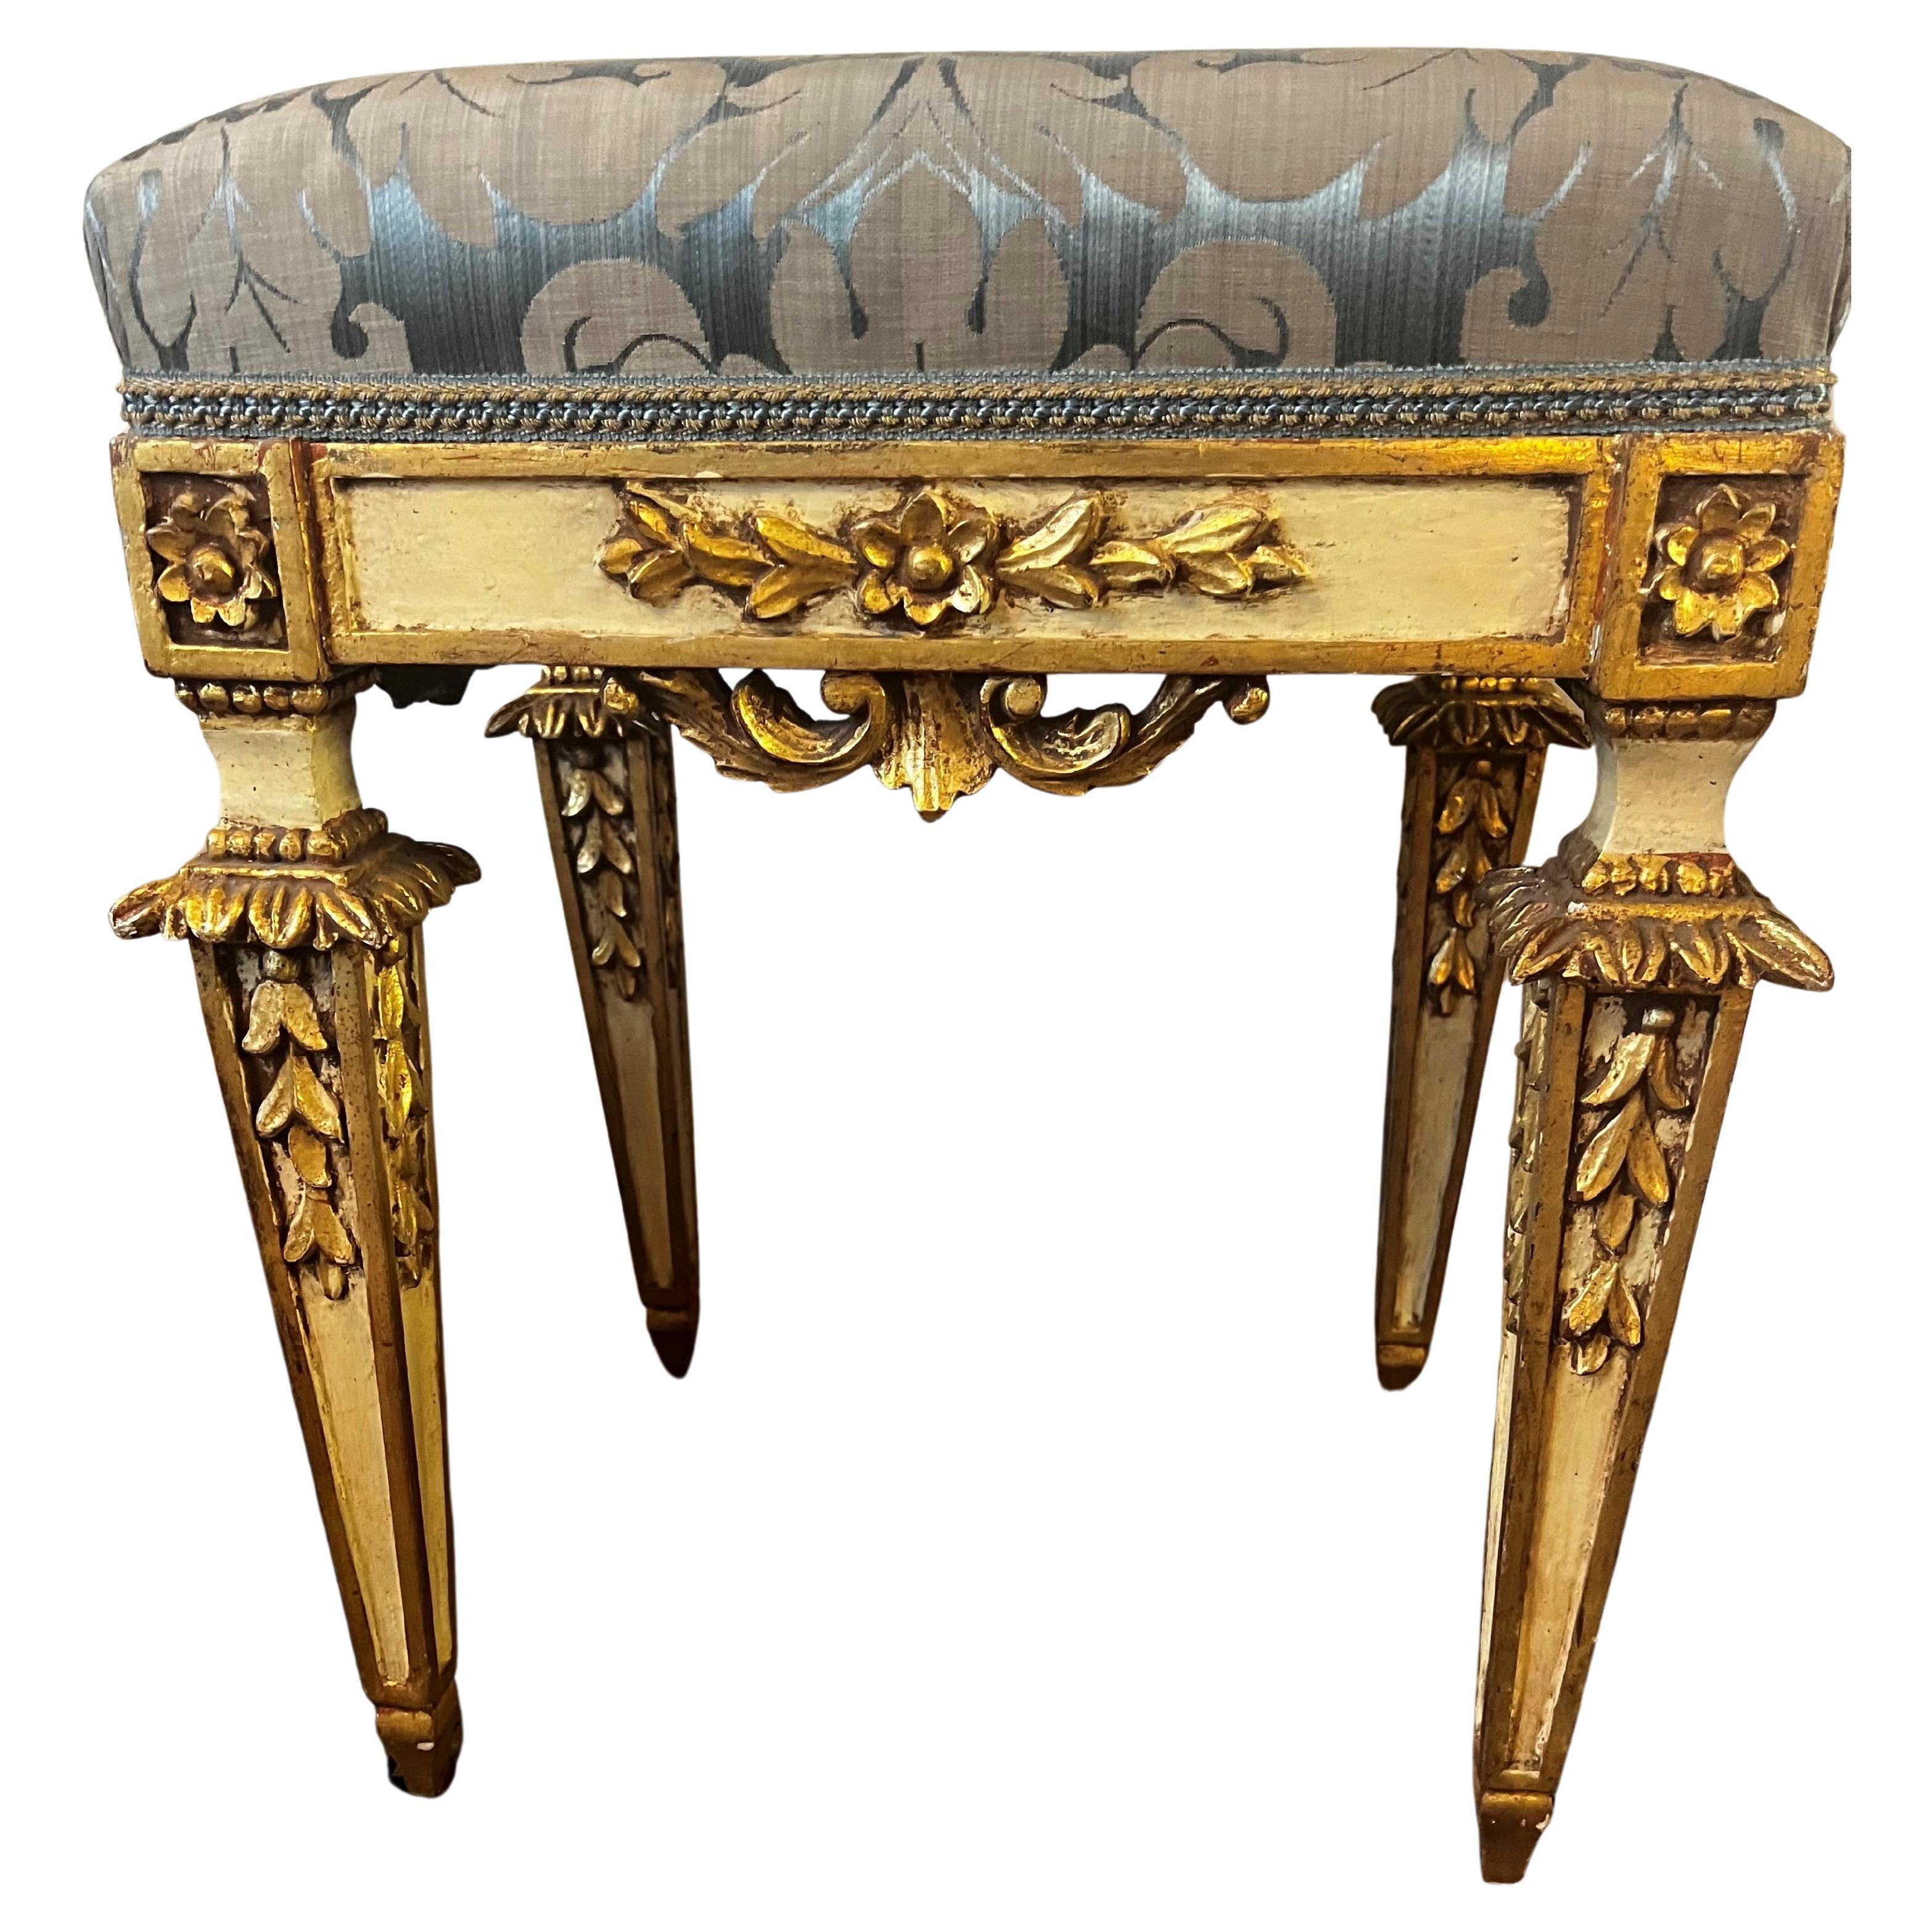 Antique French Louis XVI Gold Gilded Stool/ Tabouret